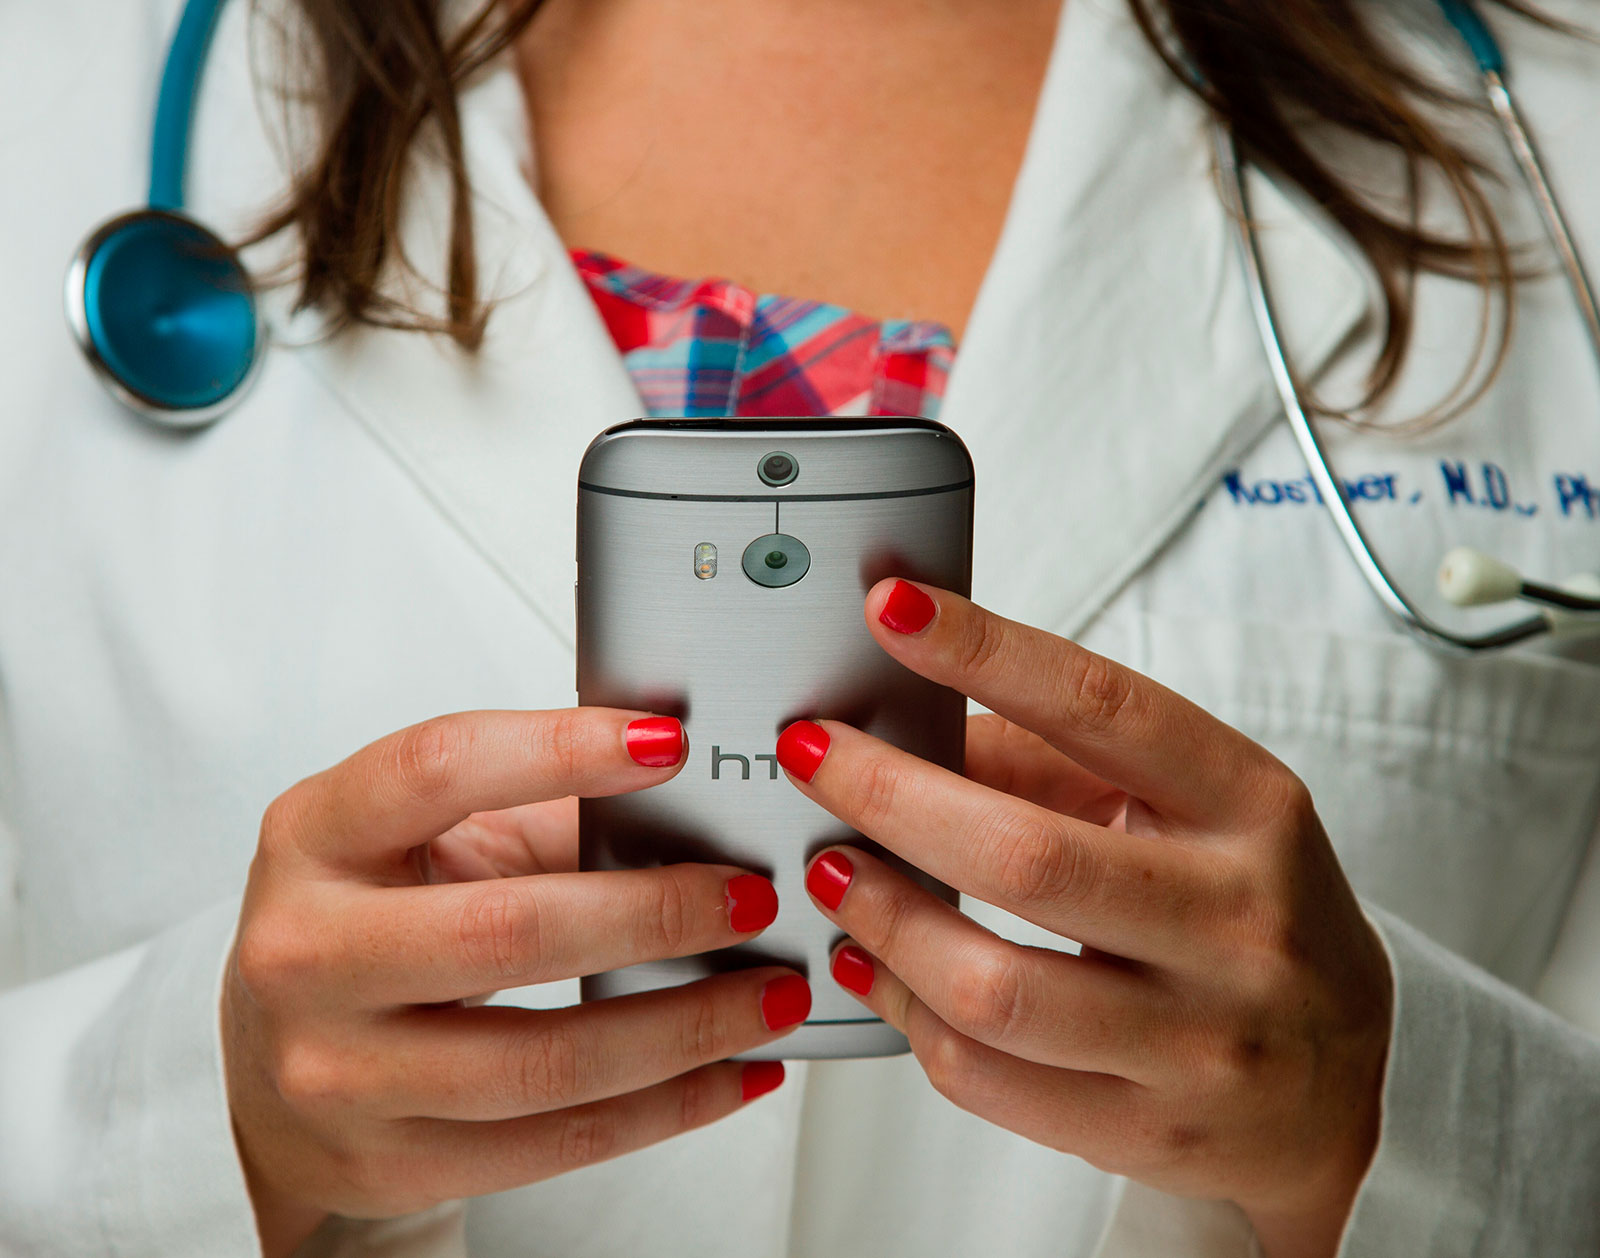 New telemedicine service: a video call with a doctor is available